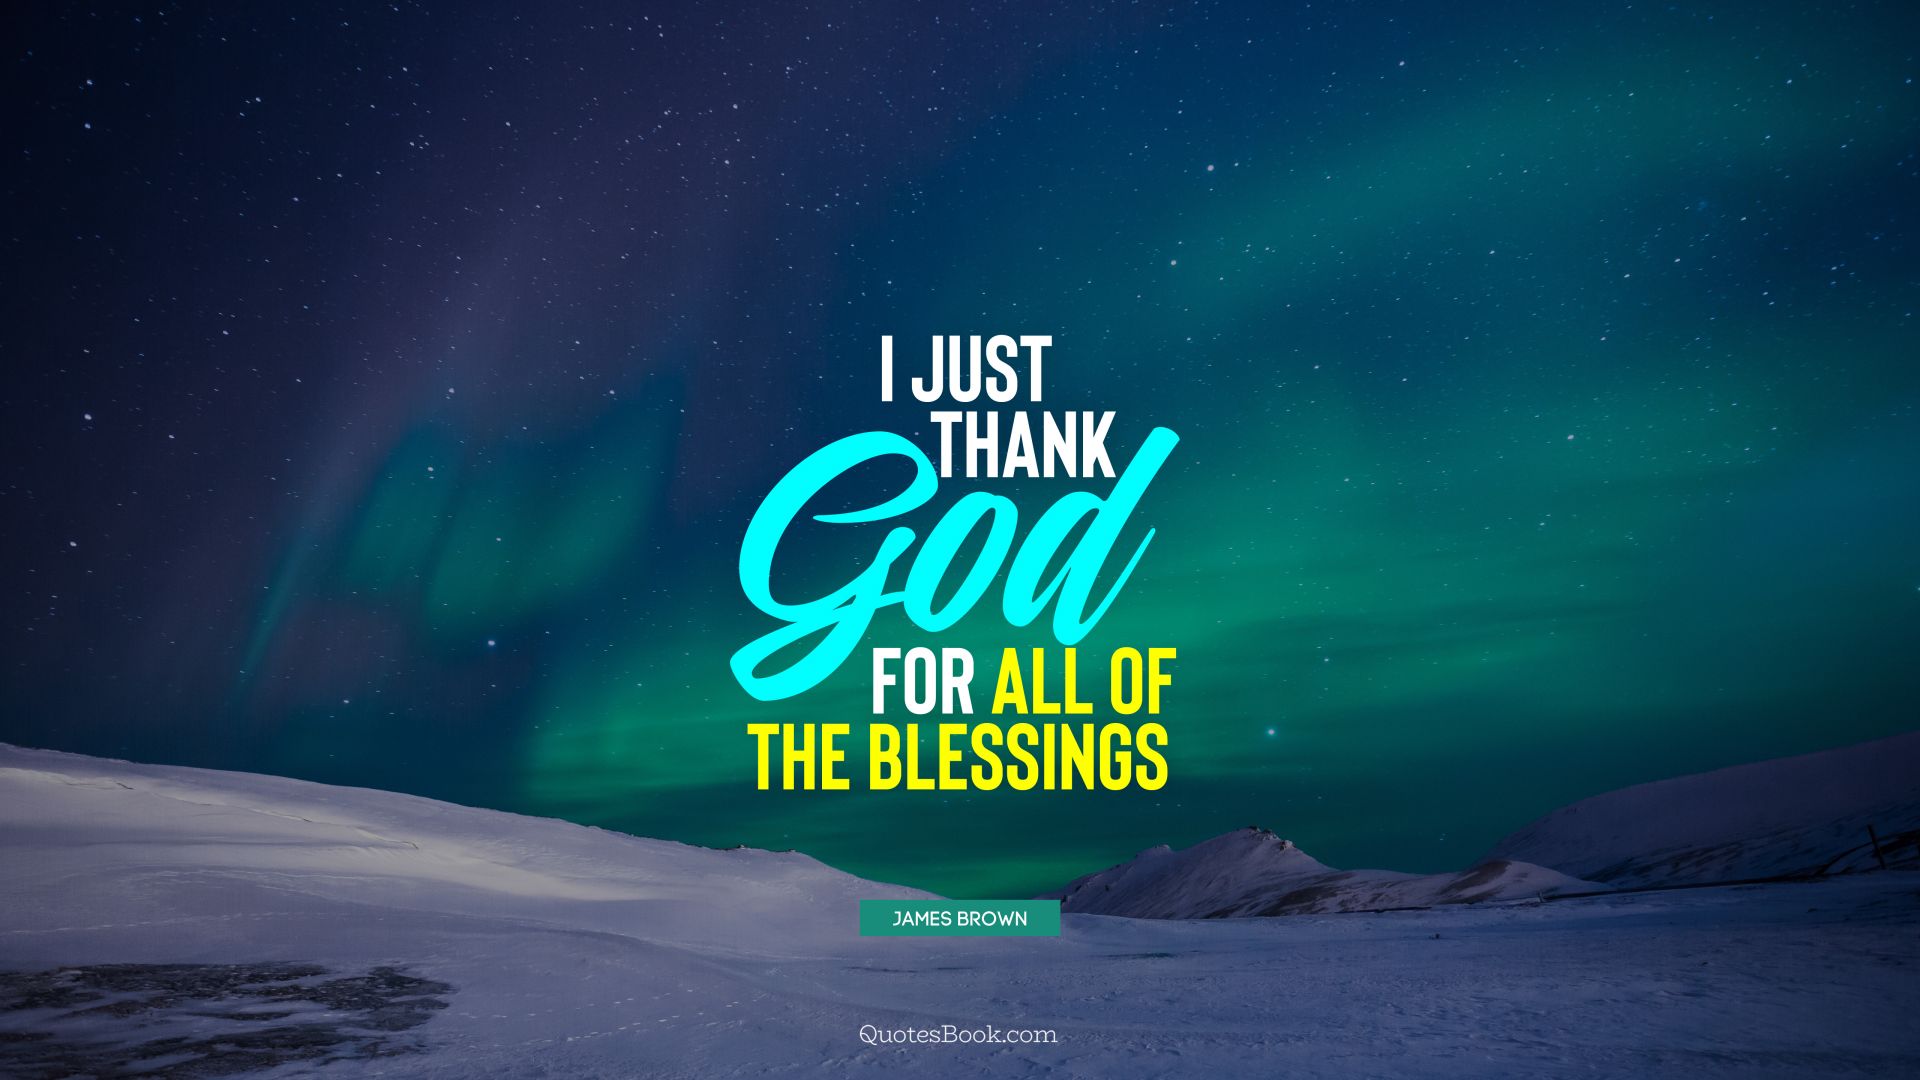 I just thank God for all of the blessings. - Quote by James Brown